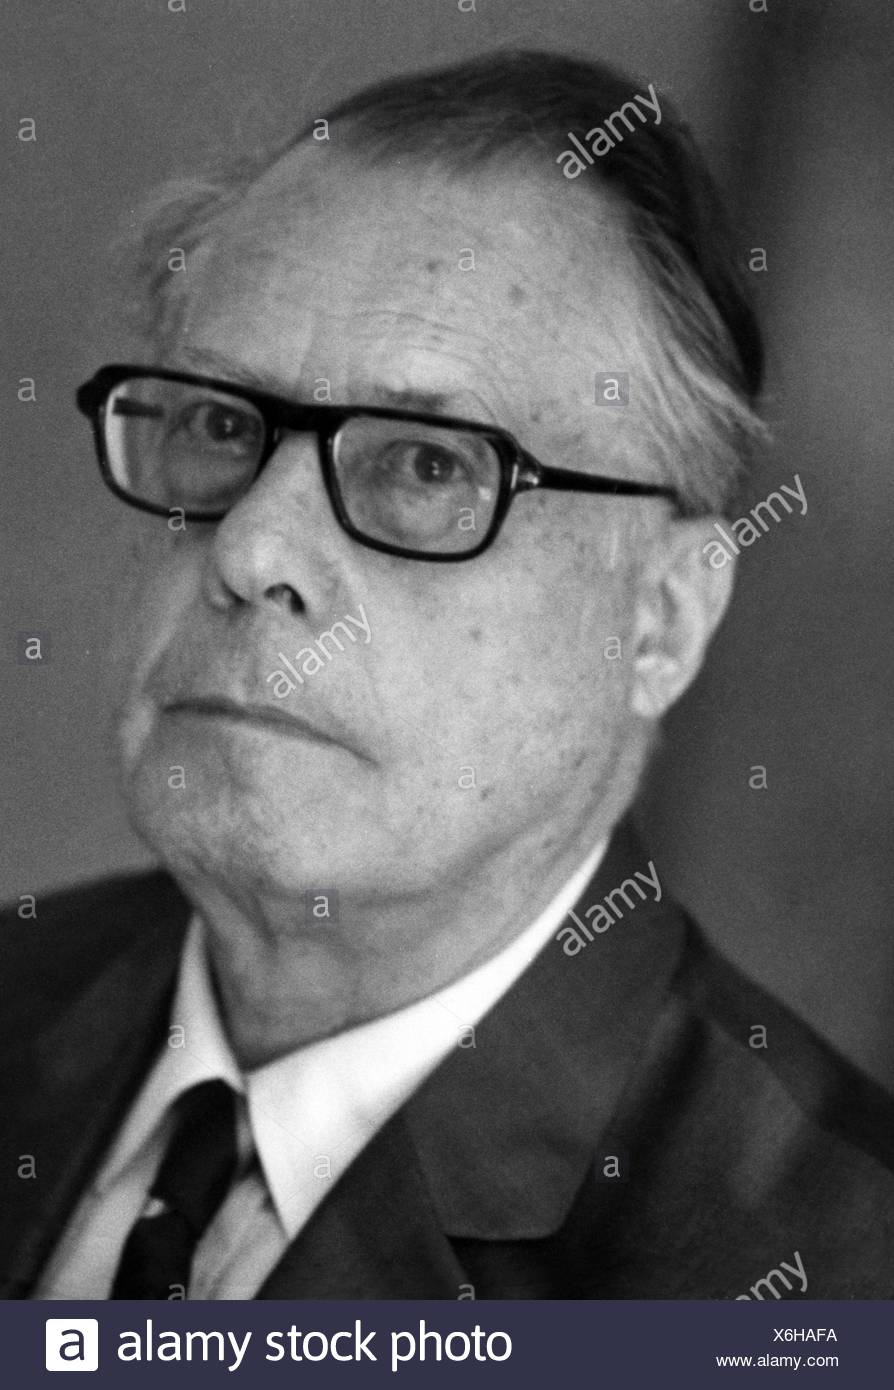 Karl Boehm High Resolution Stock Photography and Images - Alamy